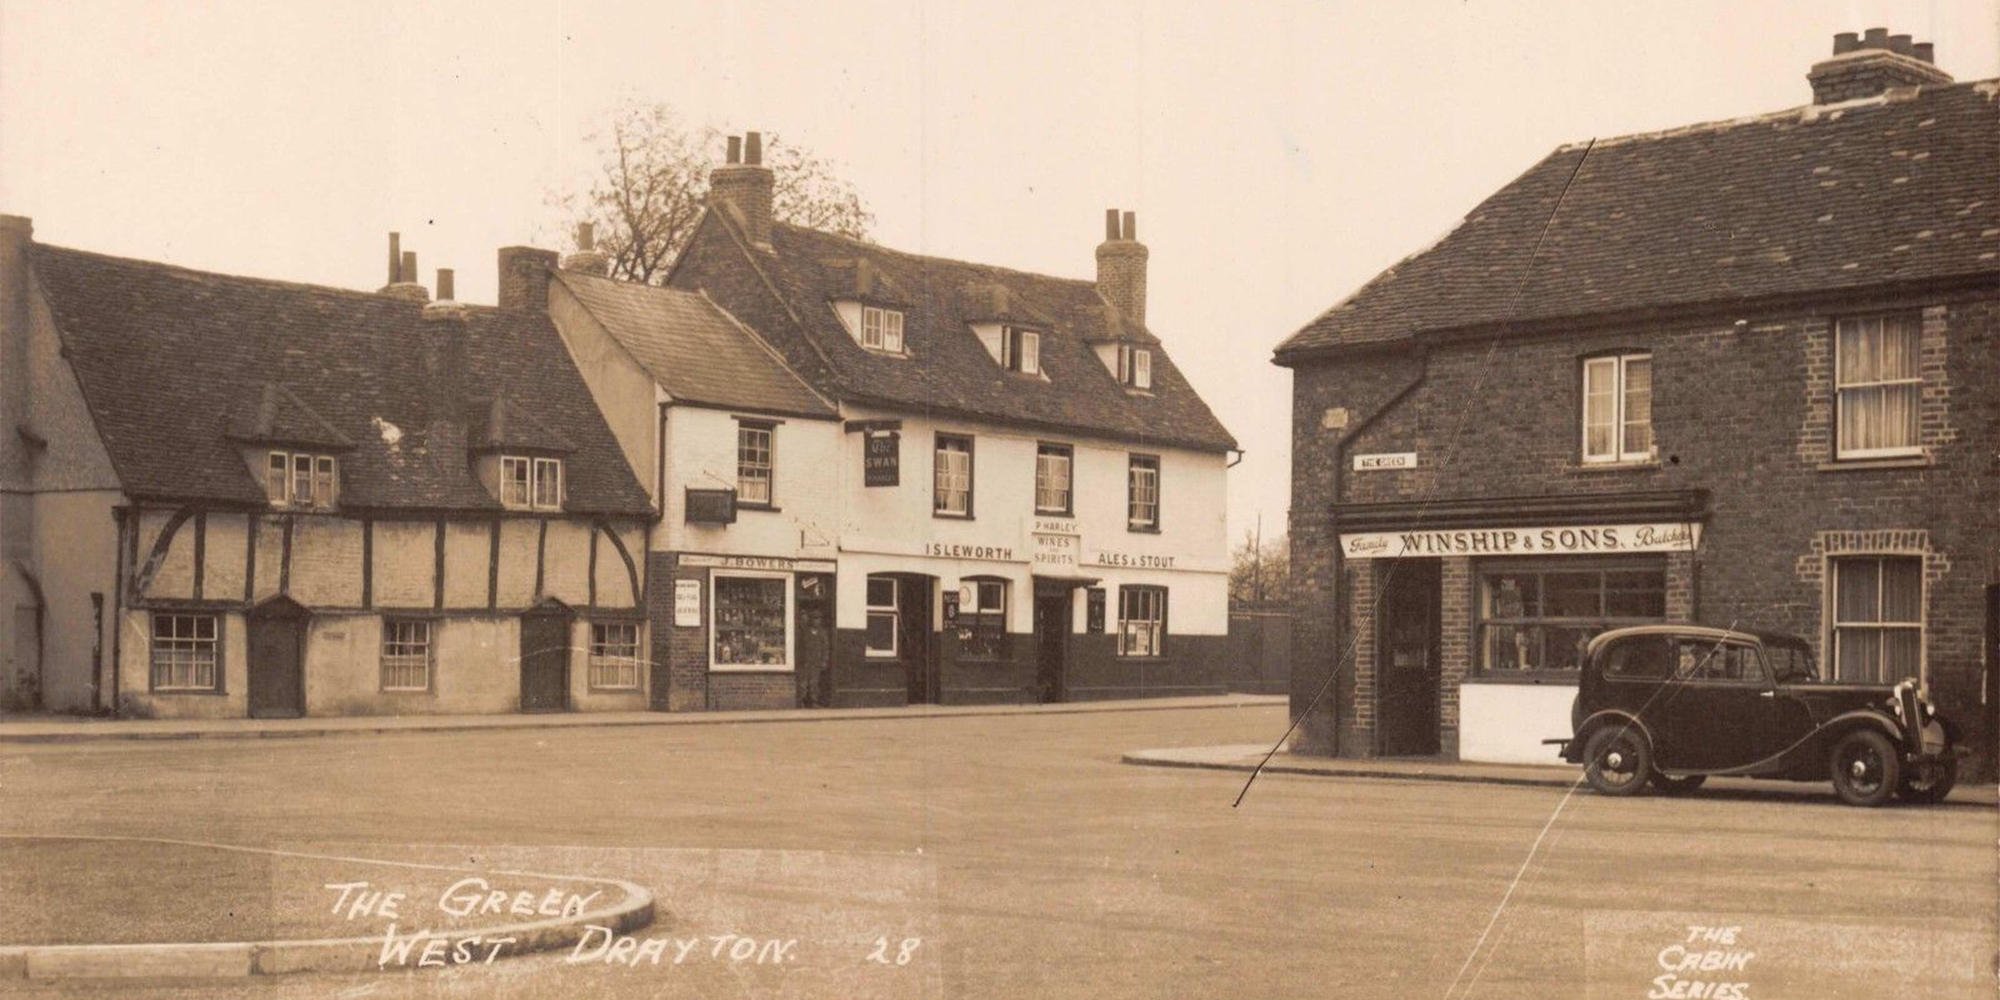 Now & Then - The Green, West Drayton